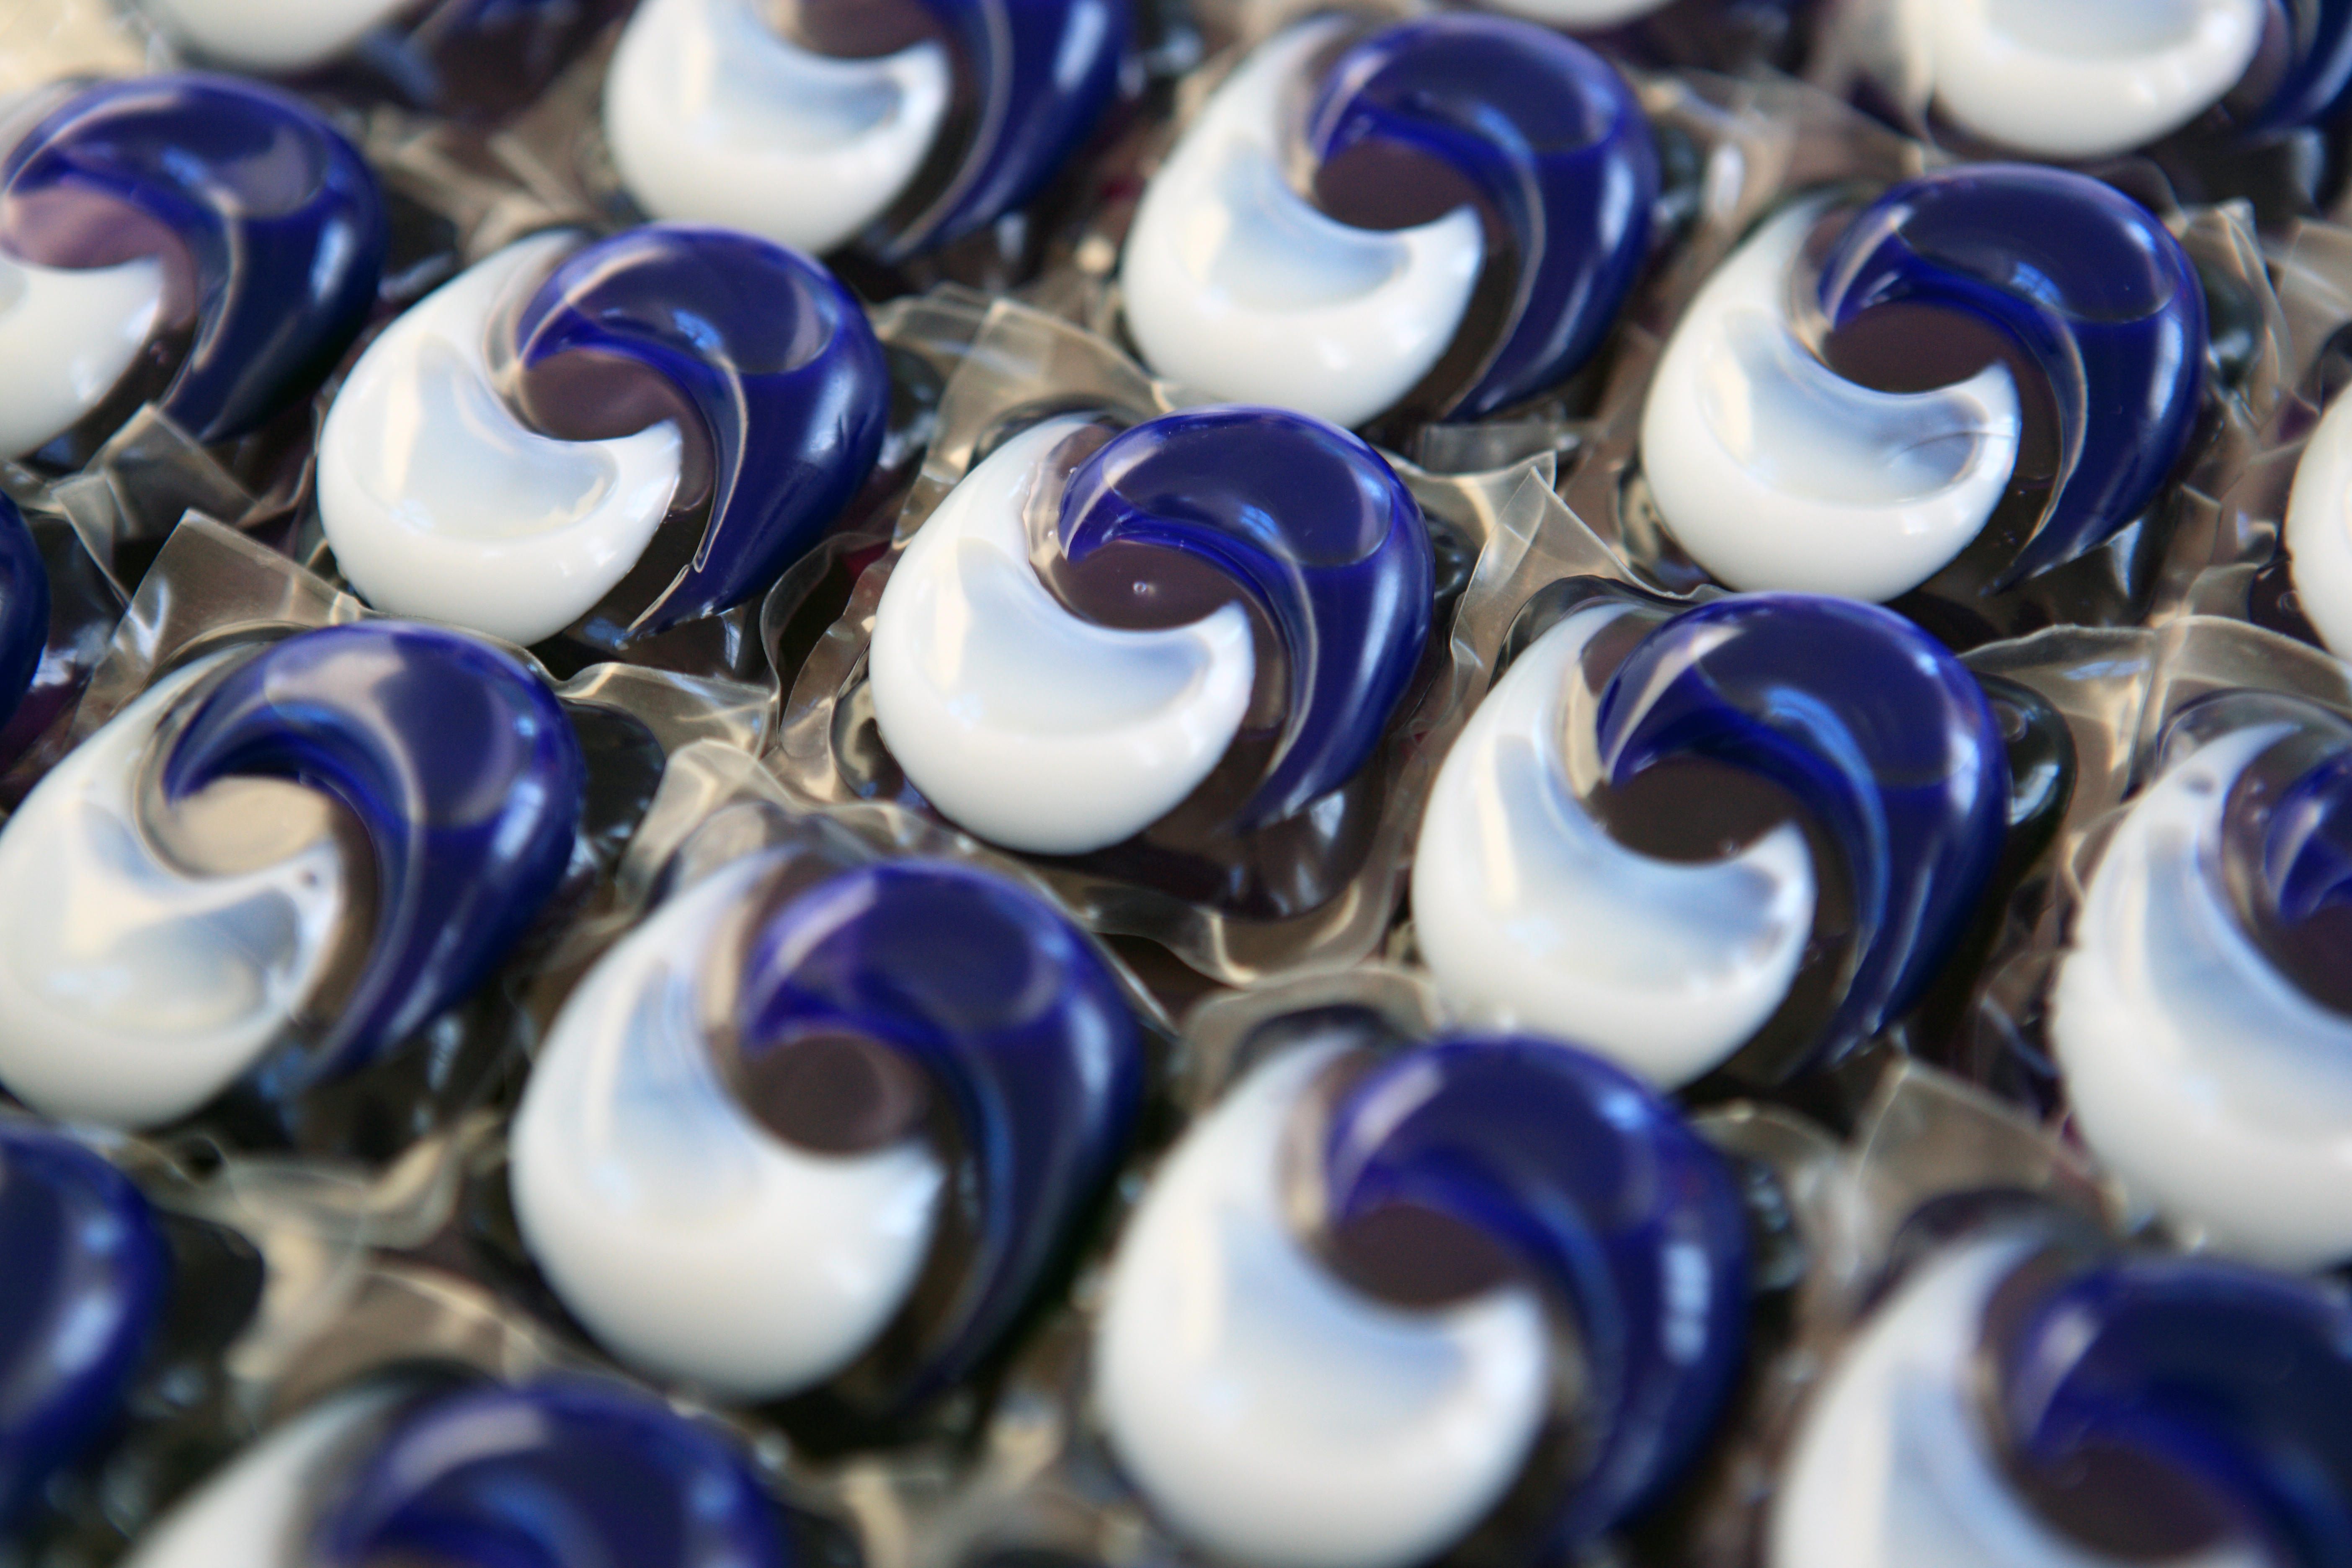 The Internet Is Obsessed With the Idea of Eating Detergent Pods, But OMG  Don't